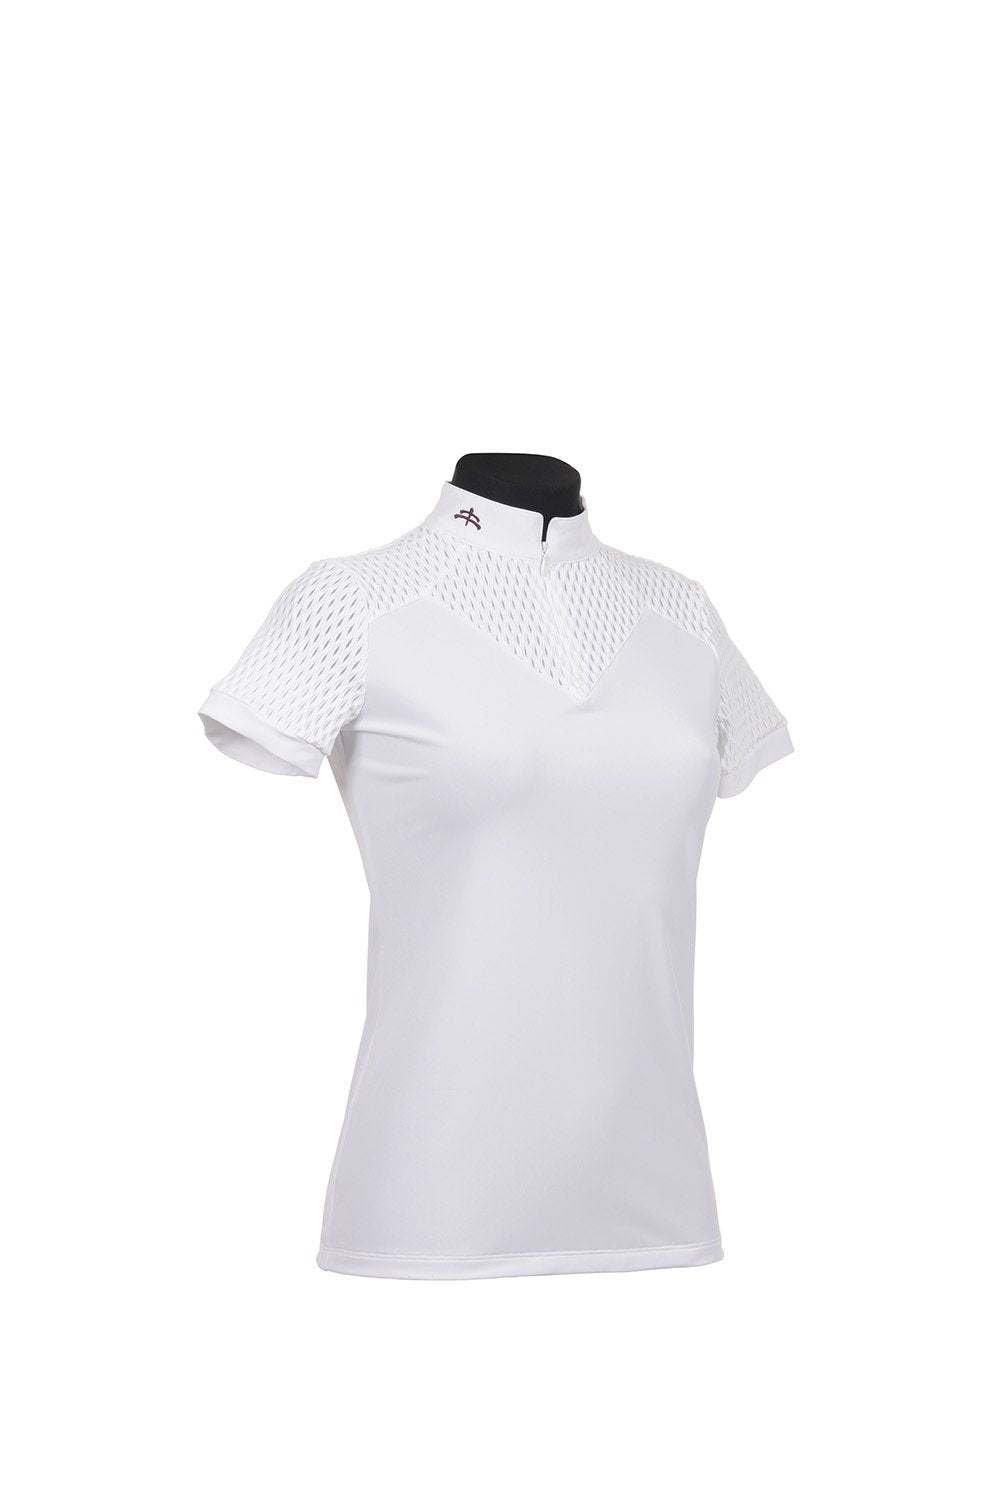 KJ | ladies shirt short sleeve | technical fabric | short sleeves shirt | short sleeves riding shirt | lady shirt | lady riding shirt | riding shirt | ladies riding shirt | lady riding polo shirt | comfort of movement | Makebe | clothing | equestrian | riding | technical material | made in Italy | elegance | white |